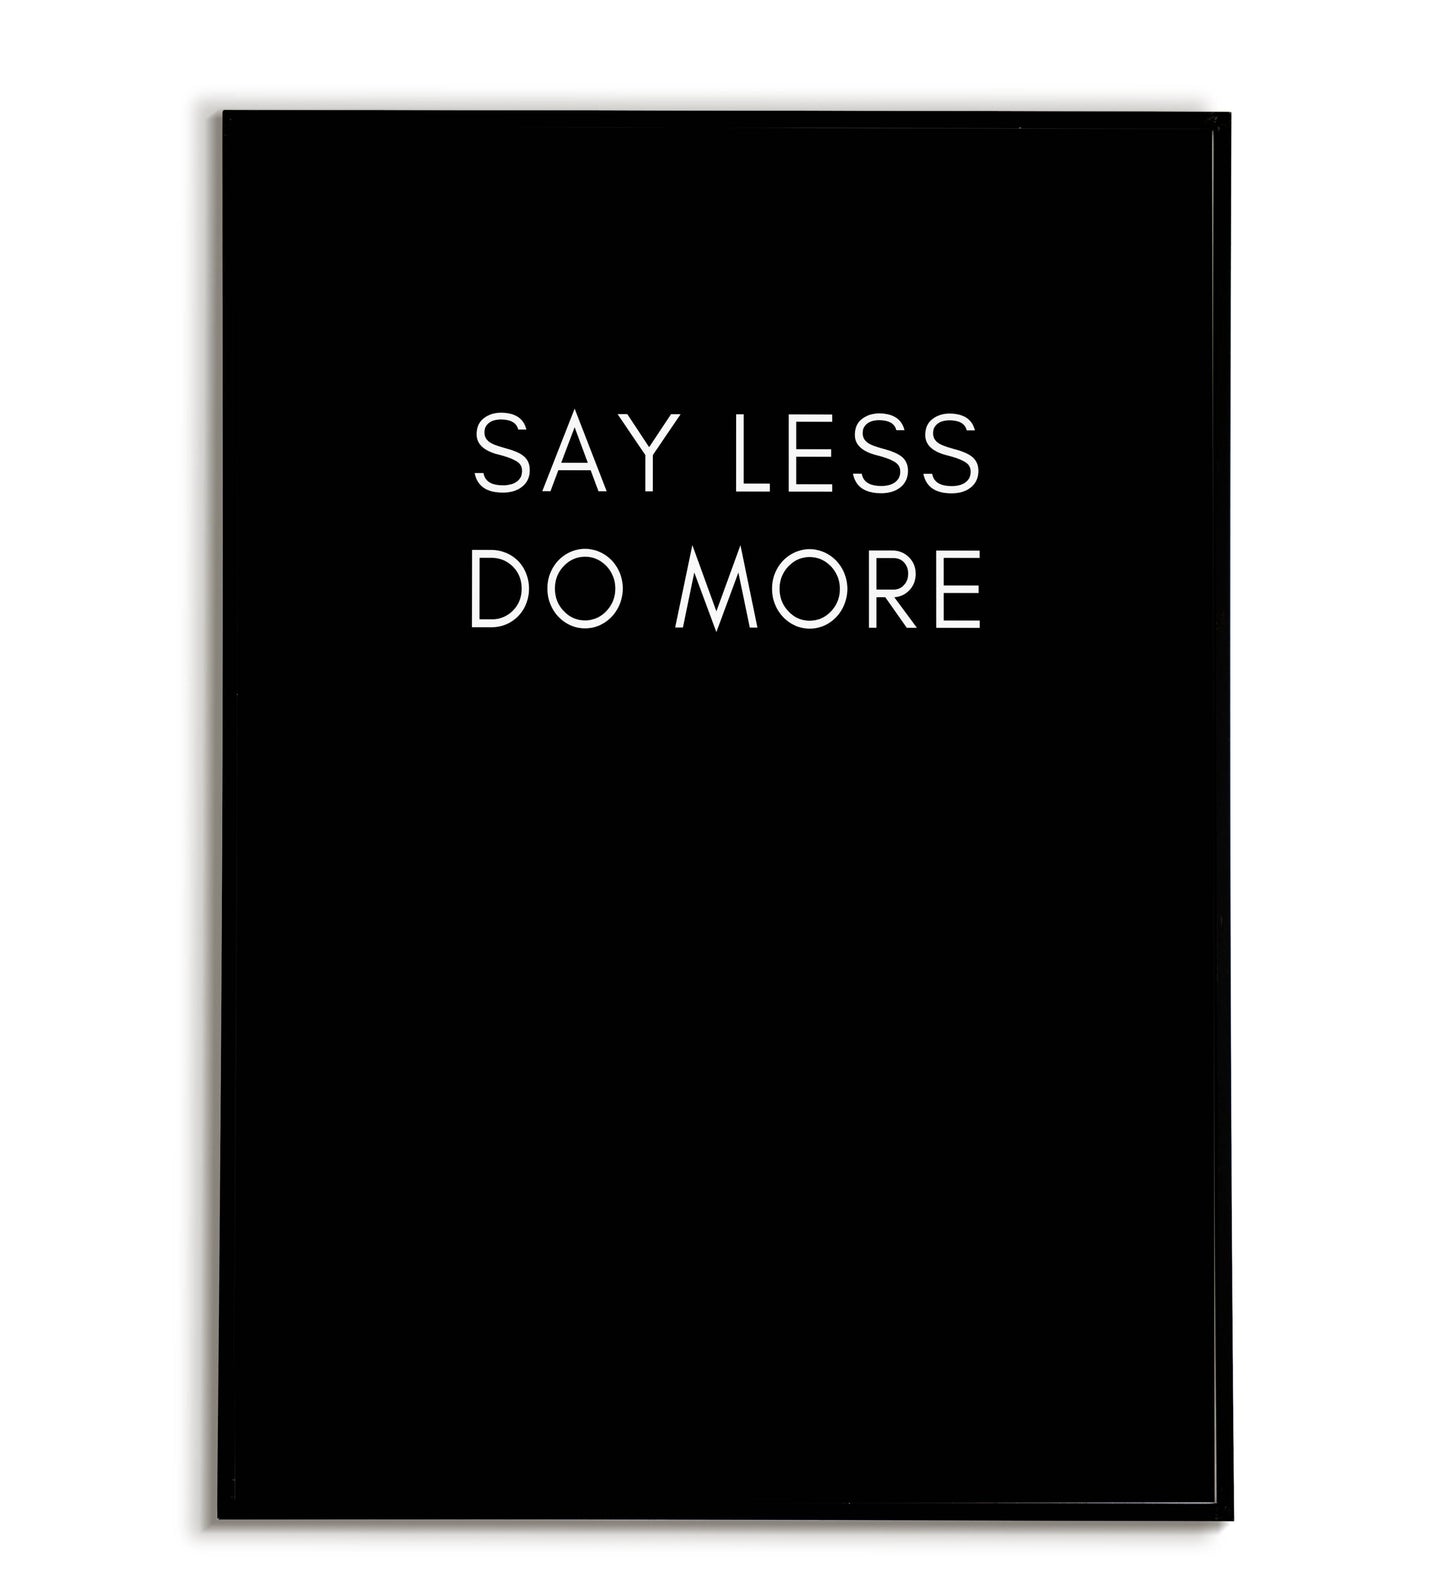 Motivational "Say less do more" printable poster, promoting action over talk.	